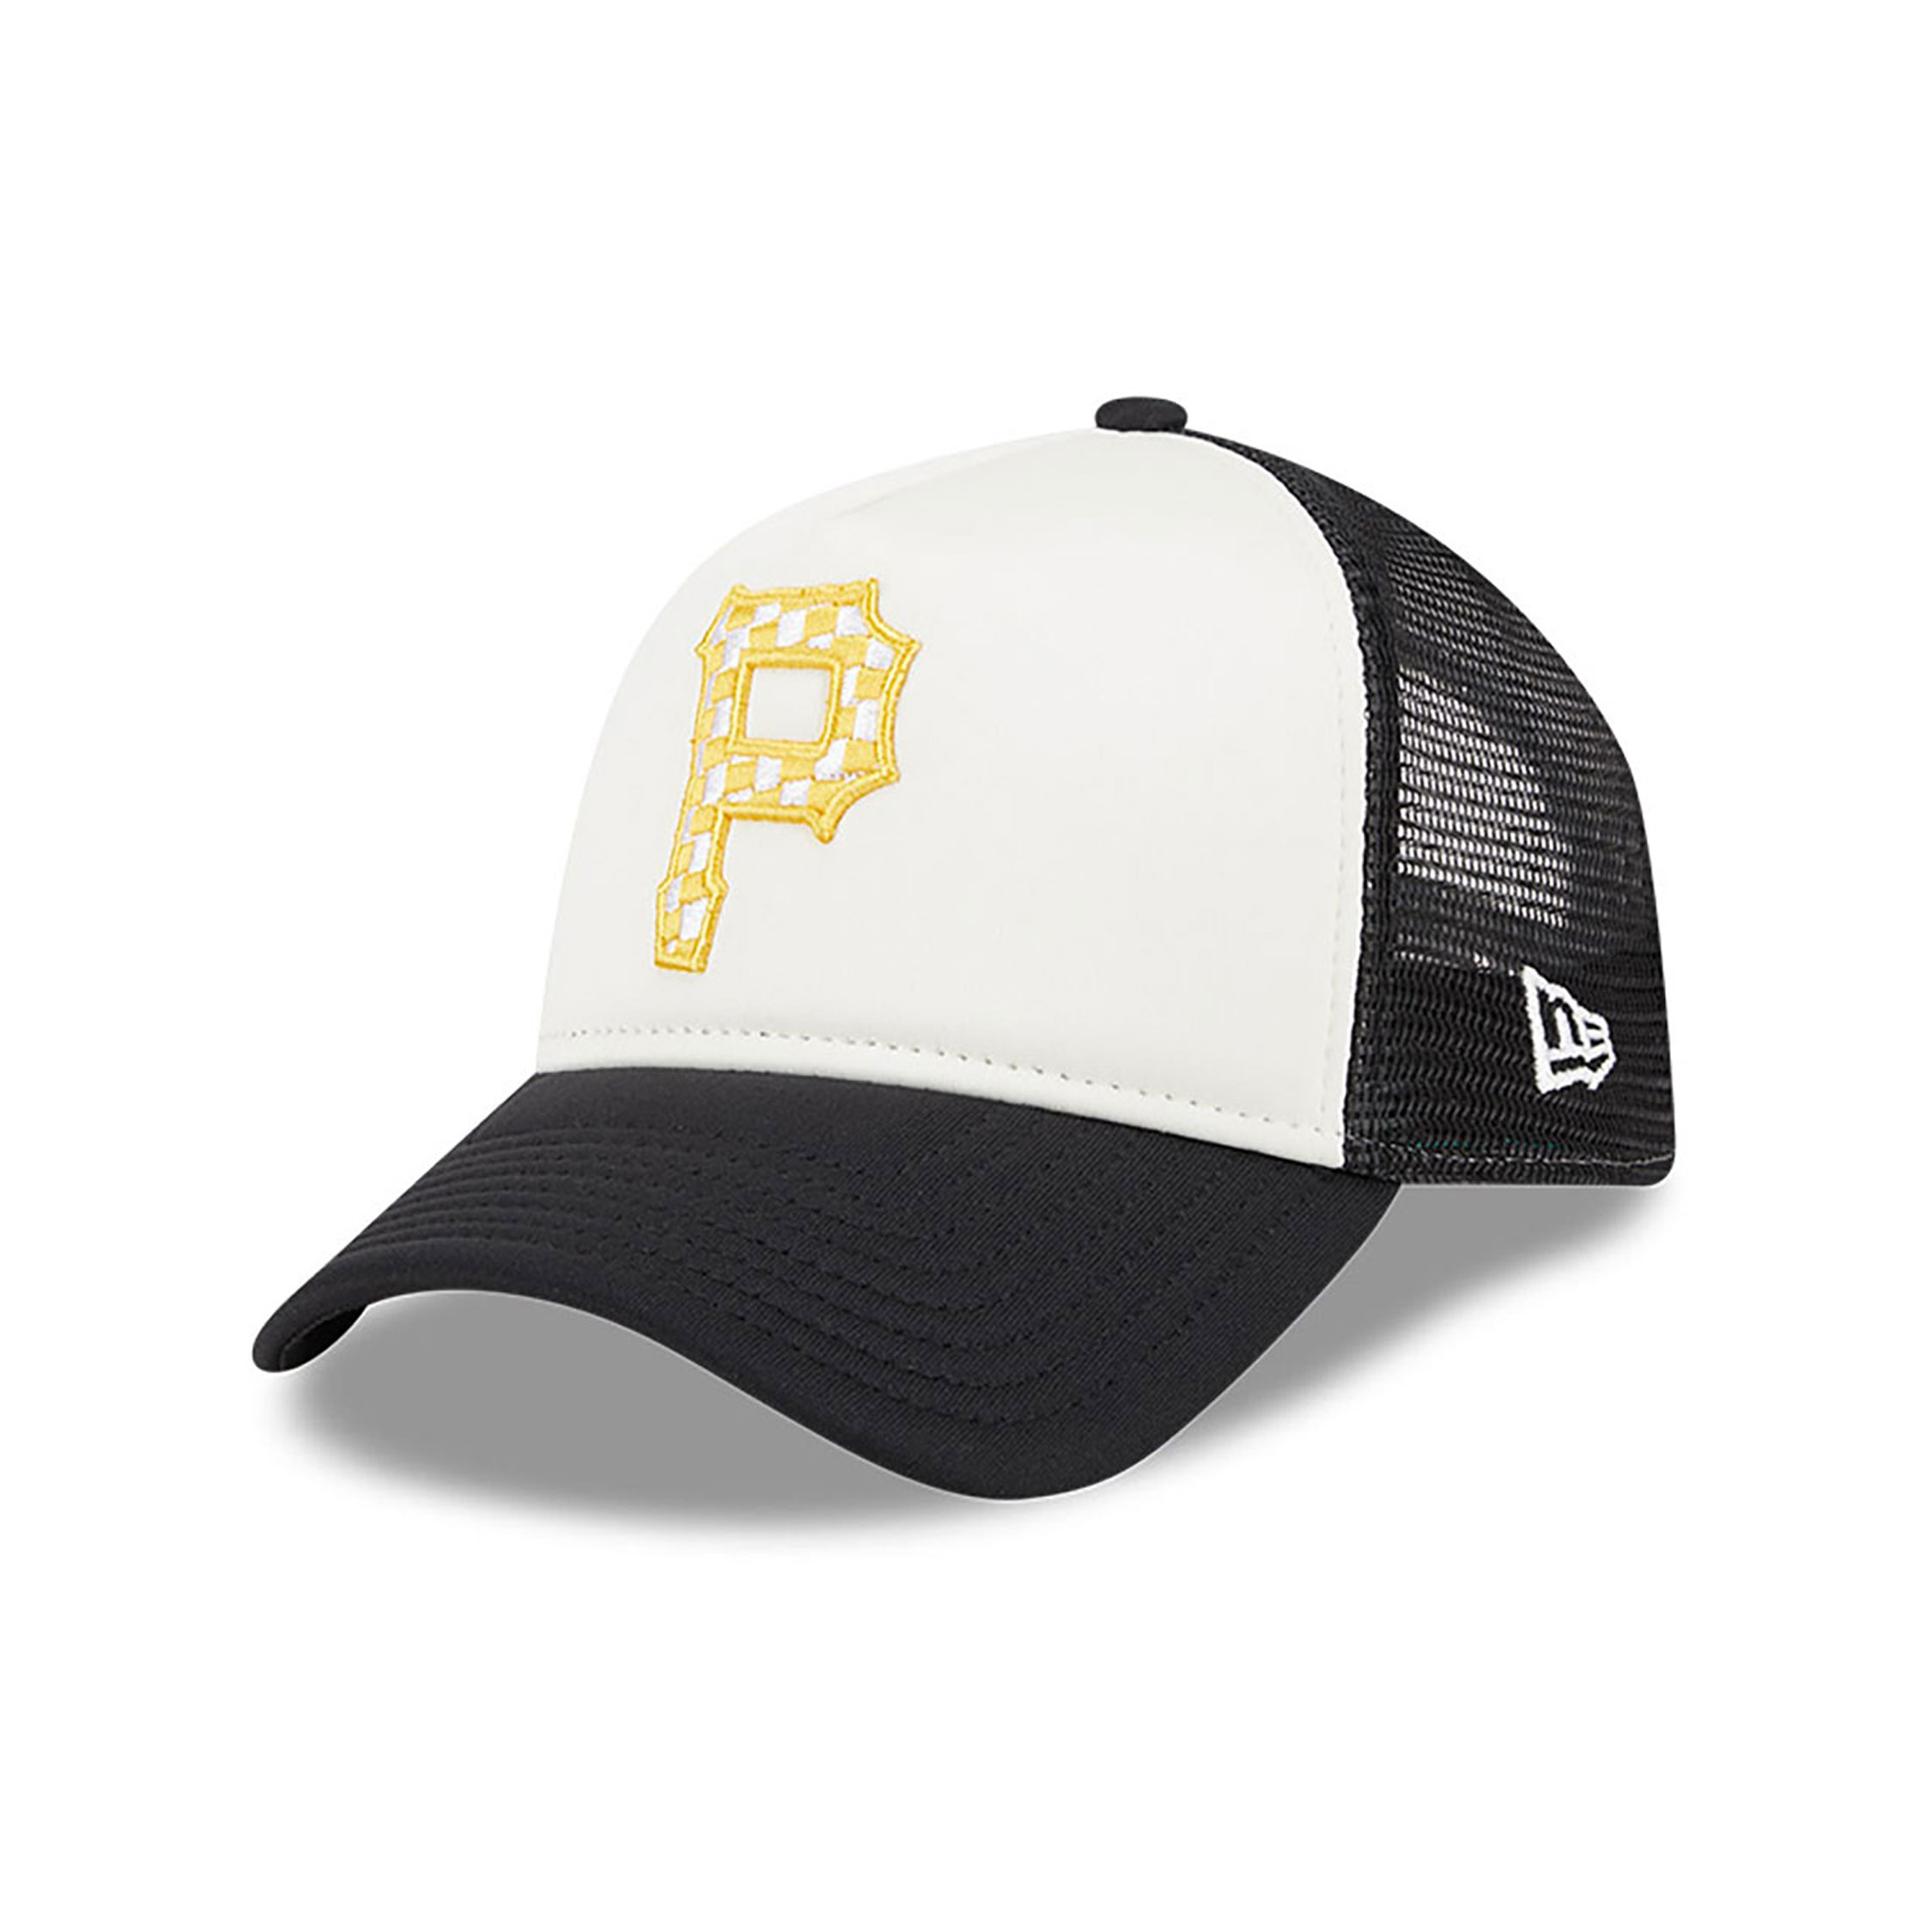 Pittsburgh Pirates Check Flag Black 9FORTY A-Frame Adjustable Trucker Cap